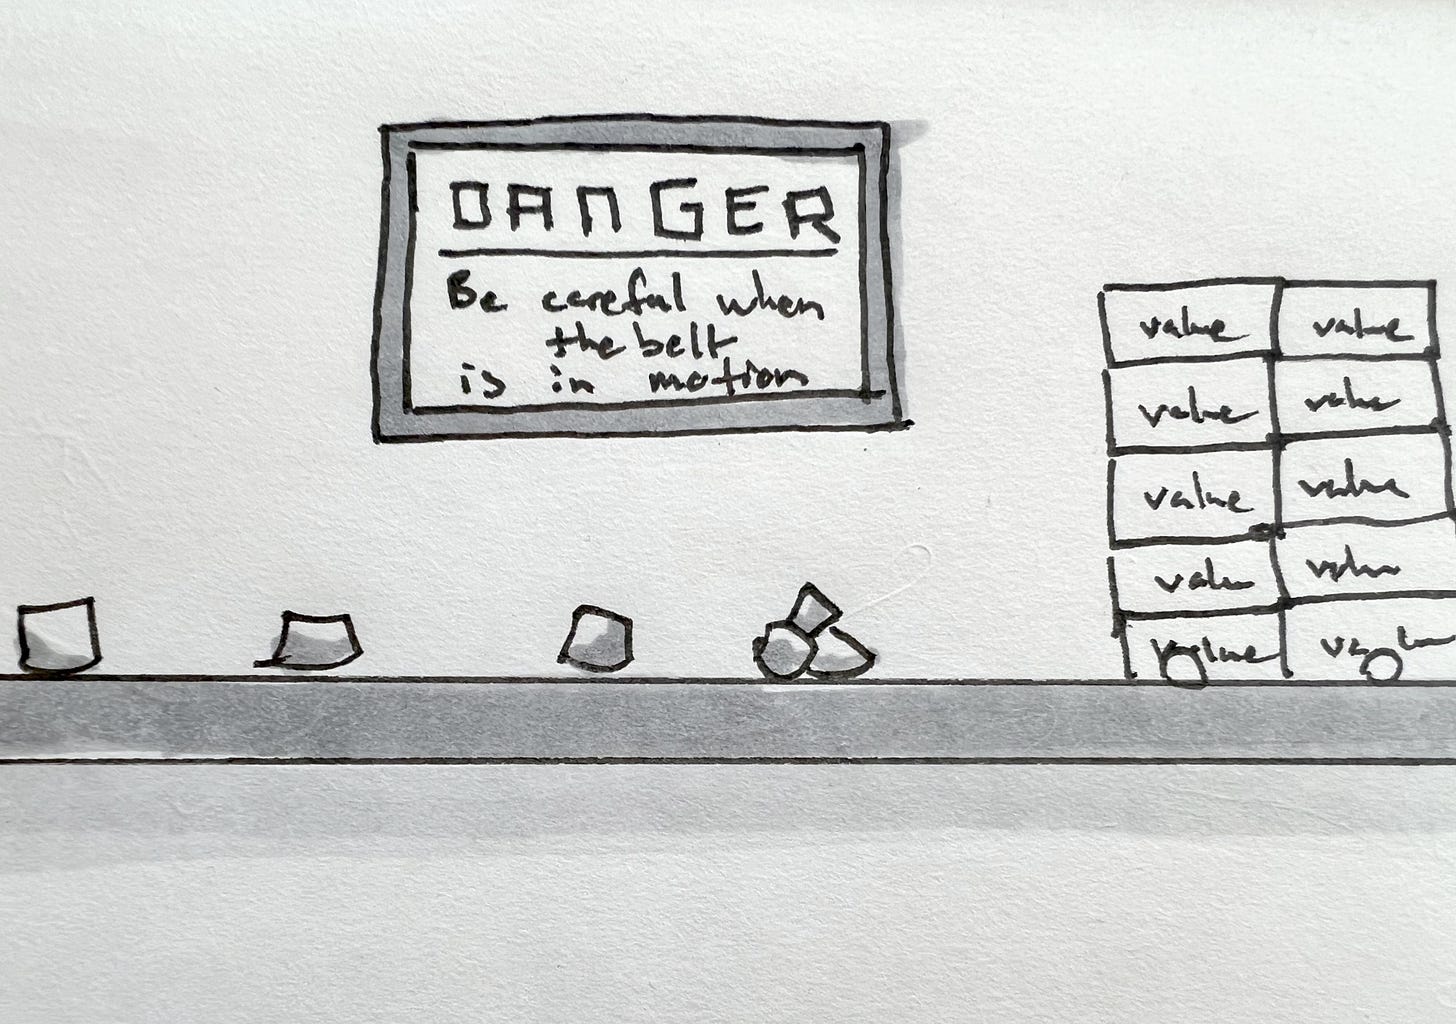 Drawing of conveyer belt with nuggets on it. In the background there is a sign that says, "Danger. Be careful when the belt is in motion" with boxes labeled "value" next to it